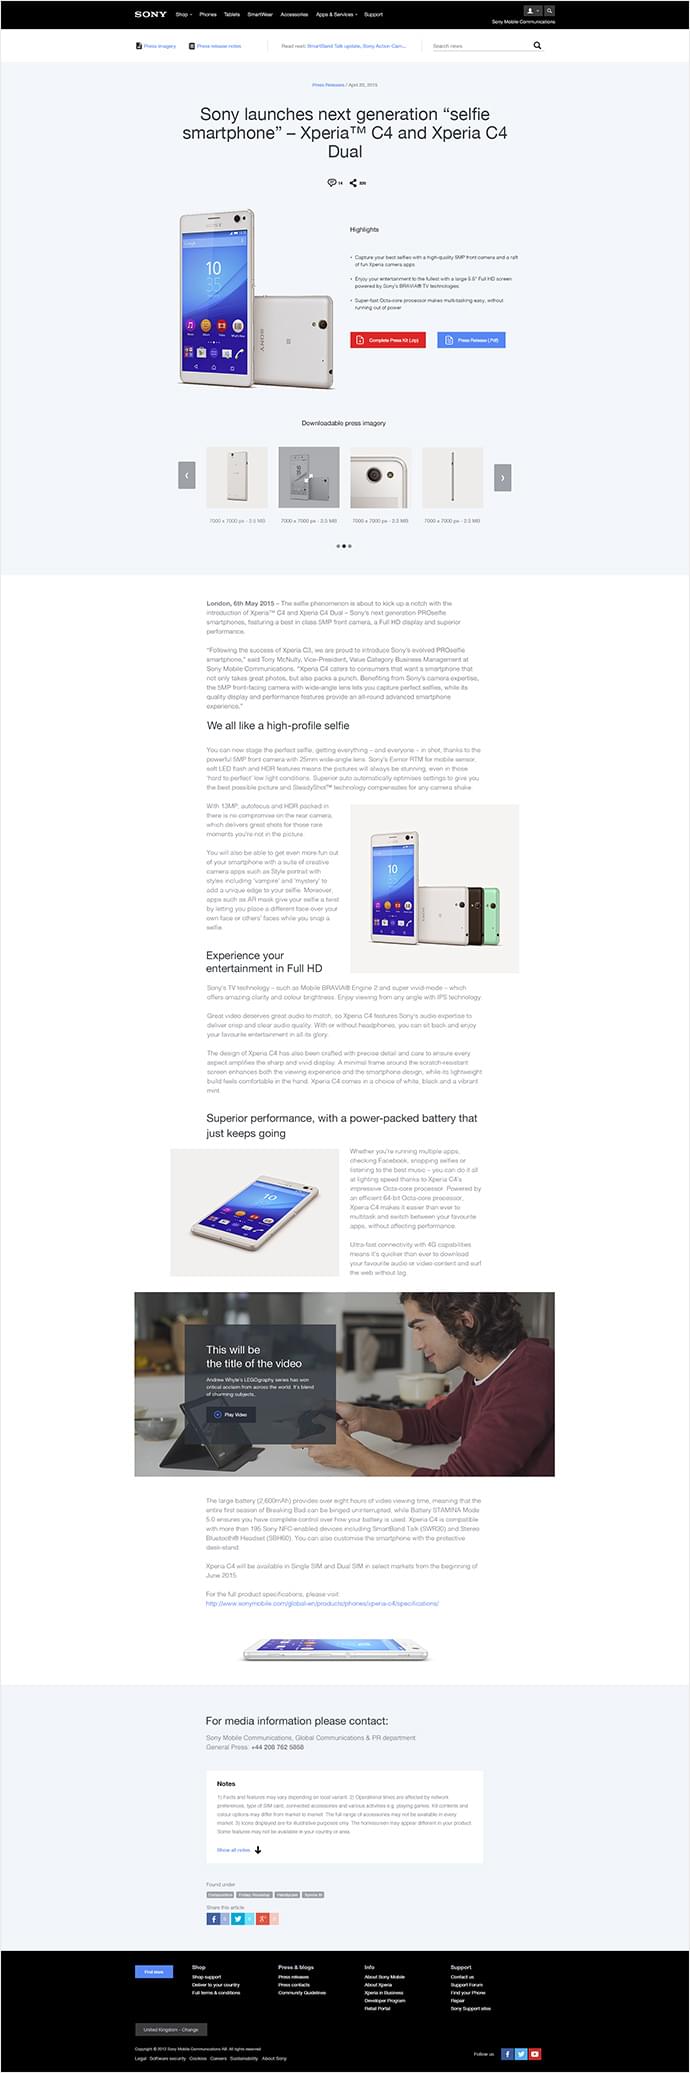 A complete redesign of the Press Release template has given the site administrators the option to showcase Sony Mobile's great products.